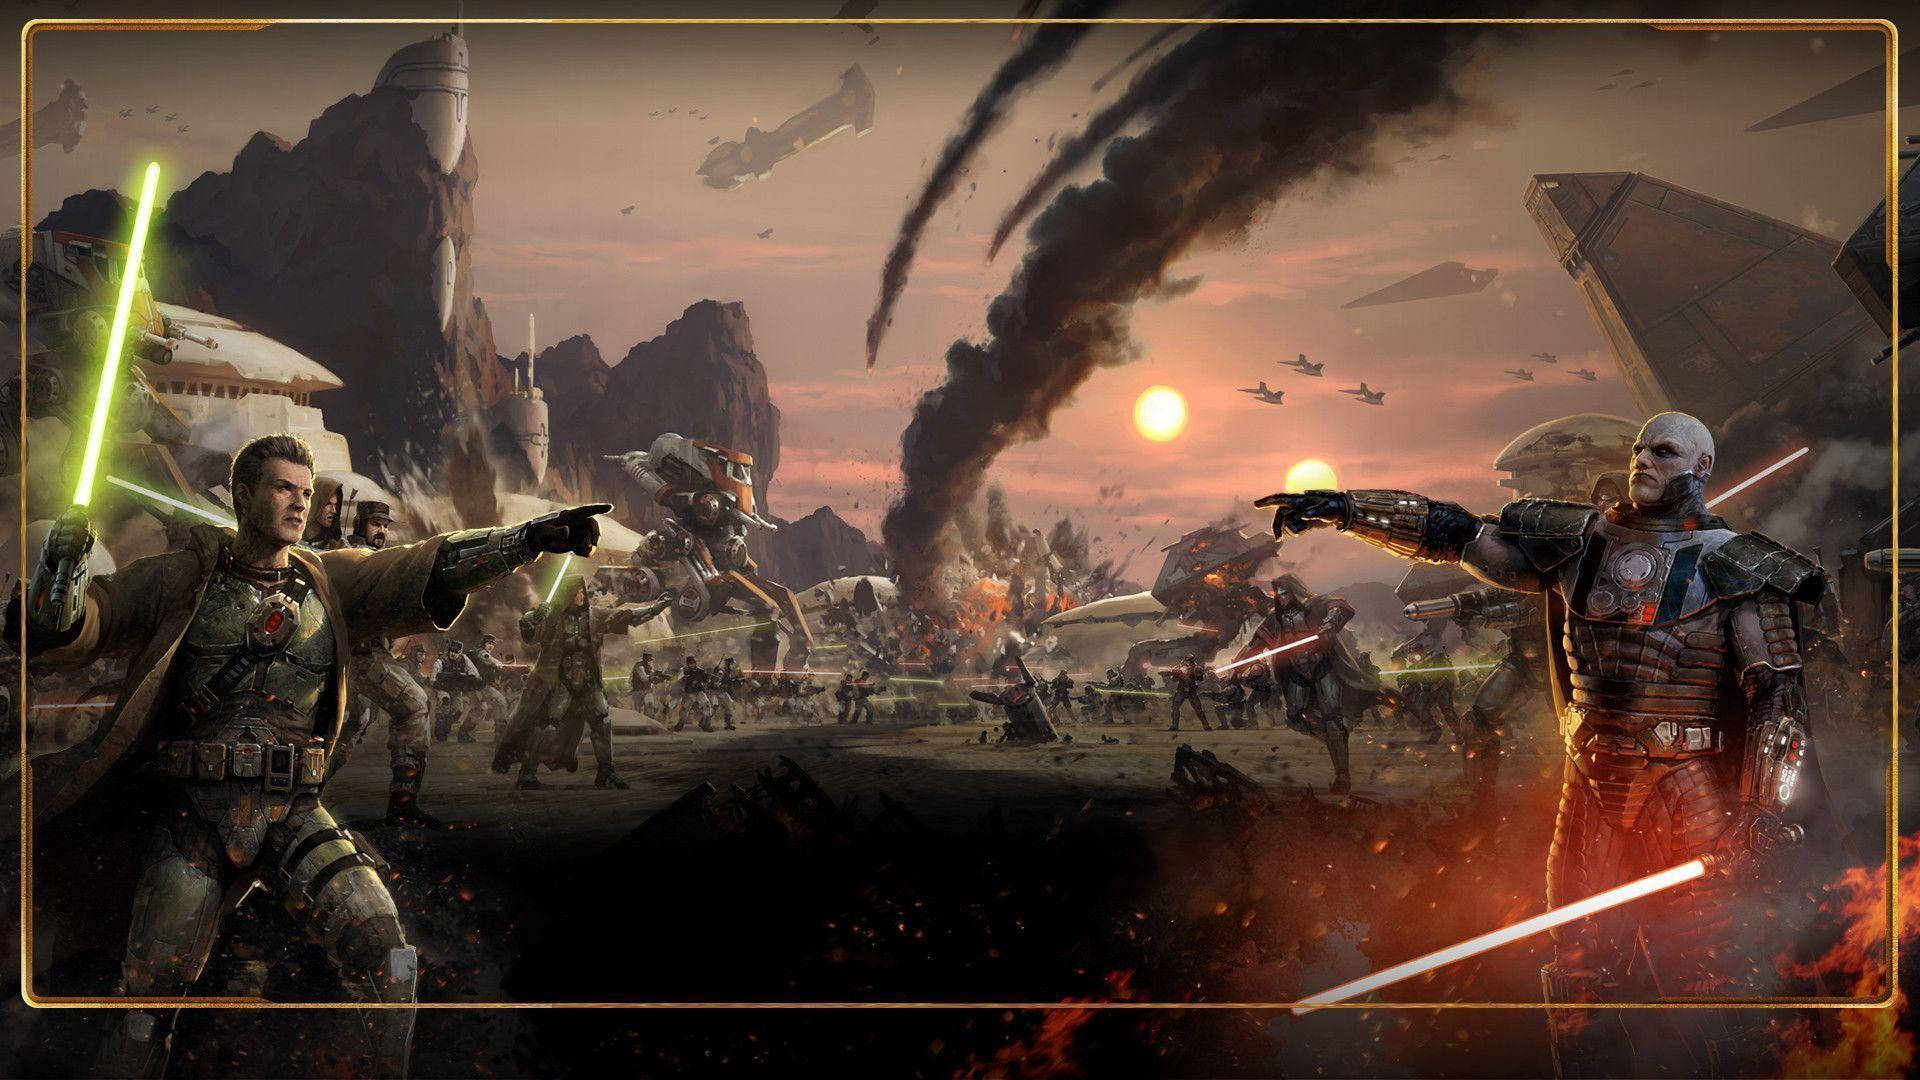 Swtor Background